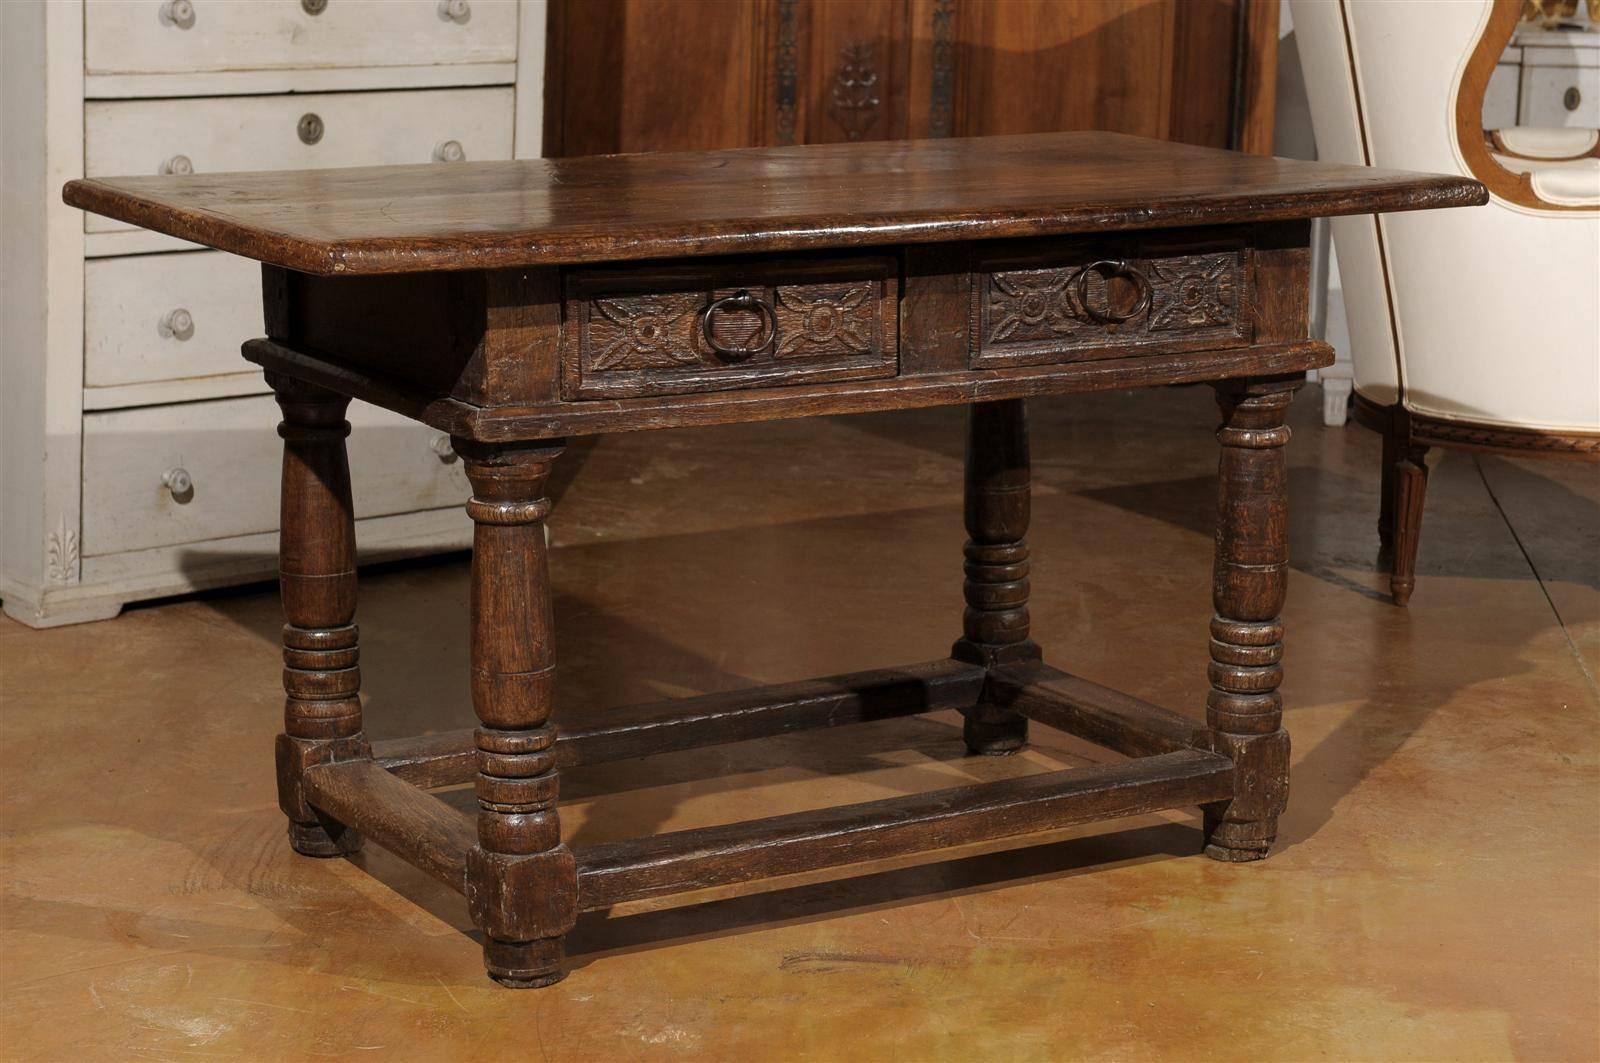 French 1750s Walnut Library Table with Carved Drawers and Original Hardware For Sale 3